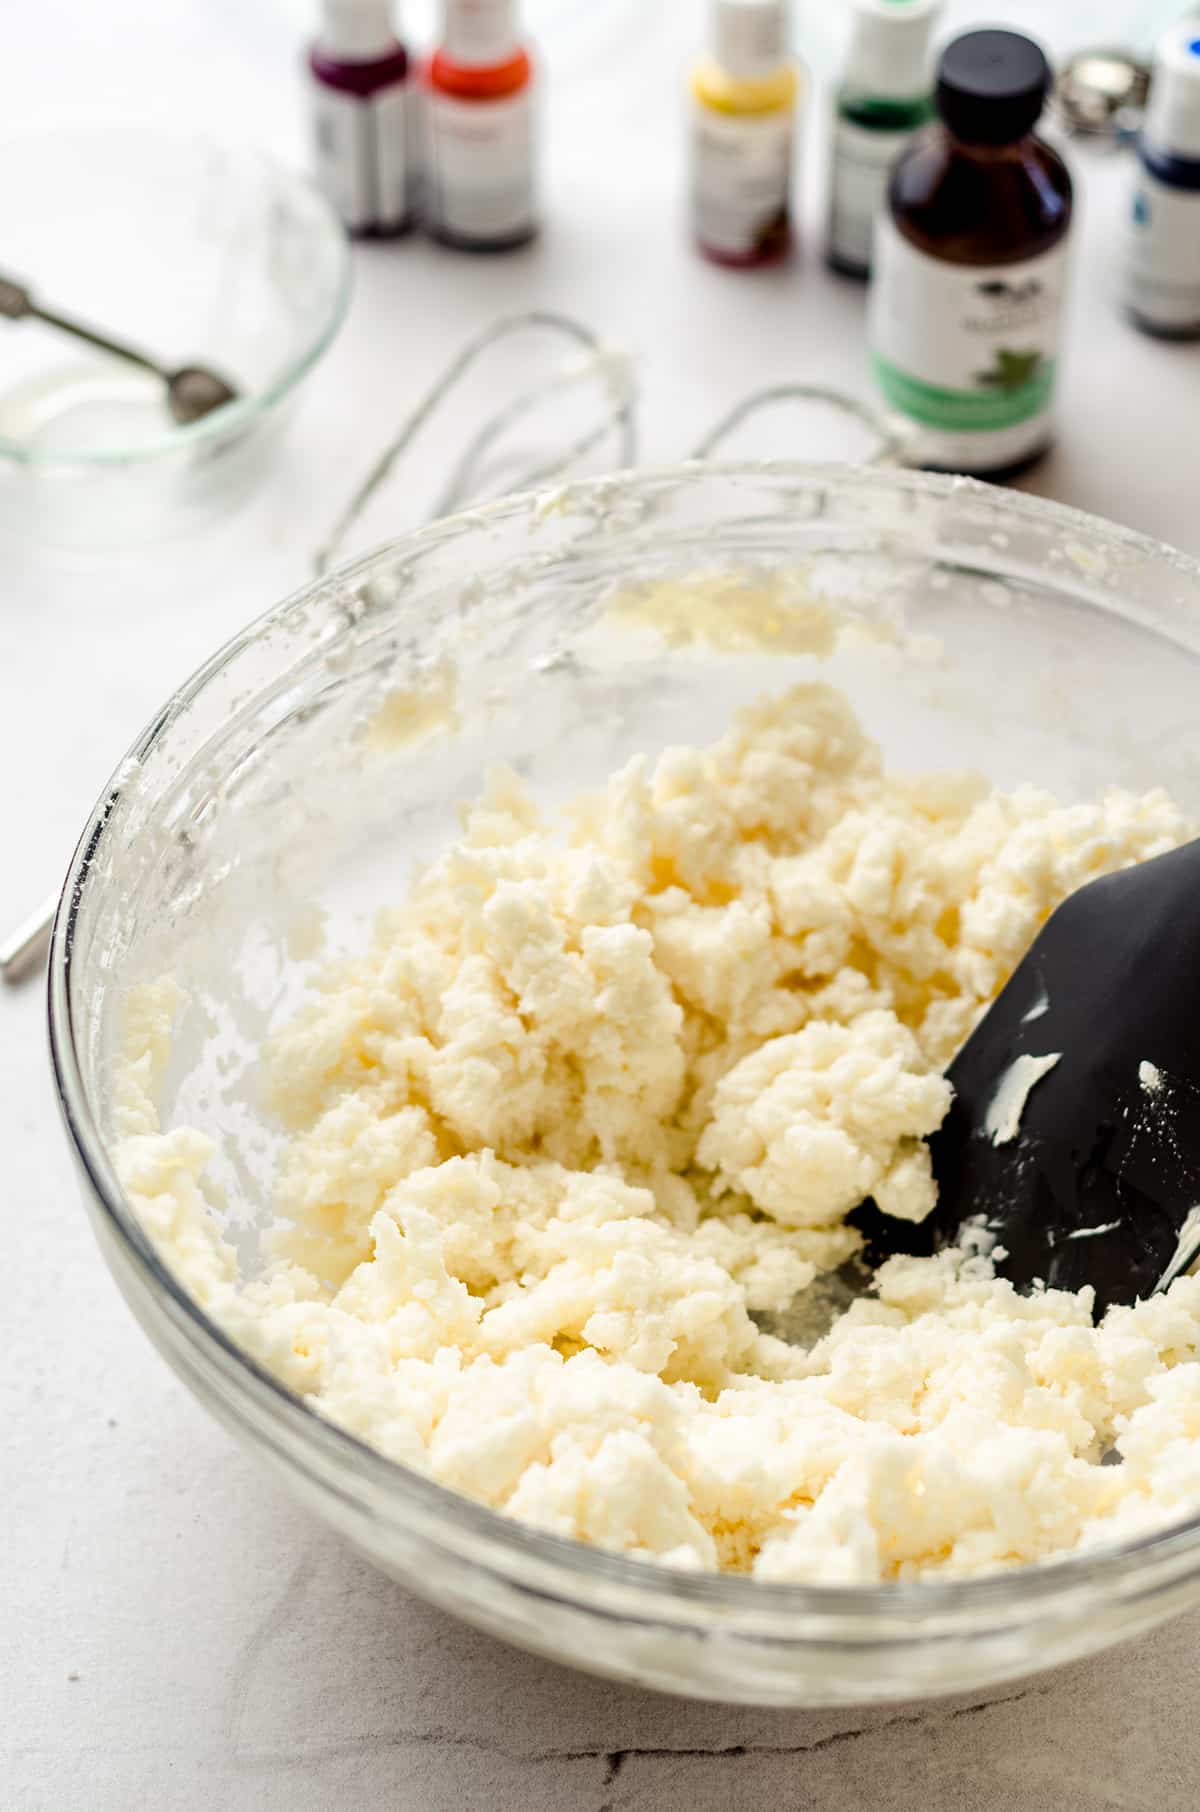 Mixing together a cream cheese dough.